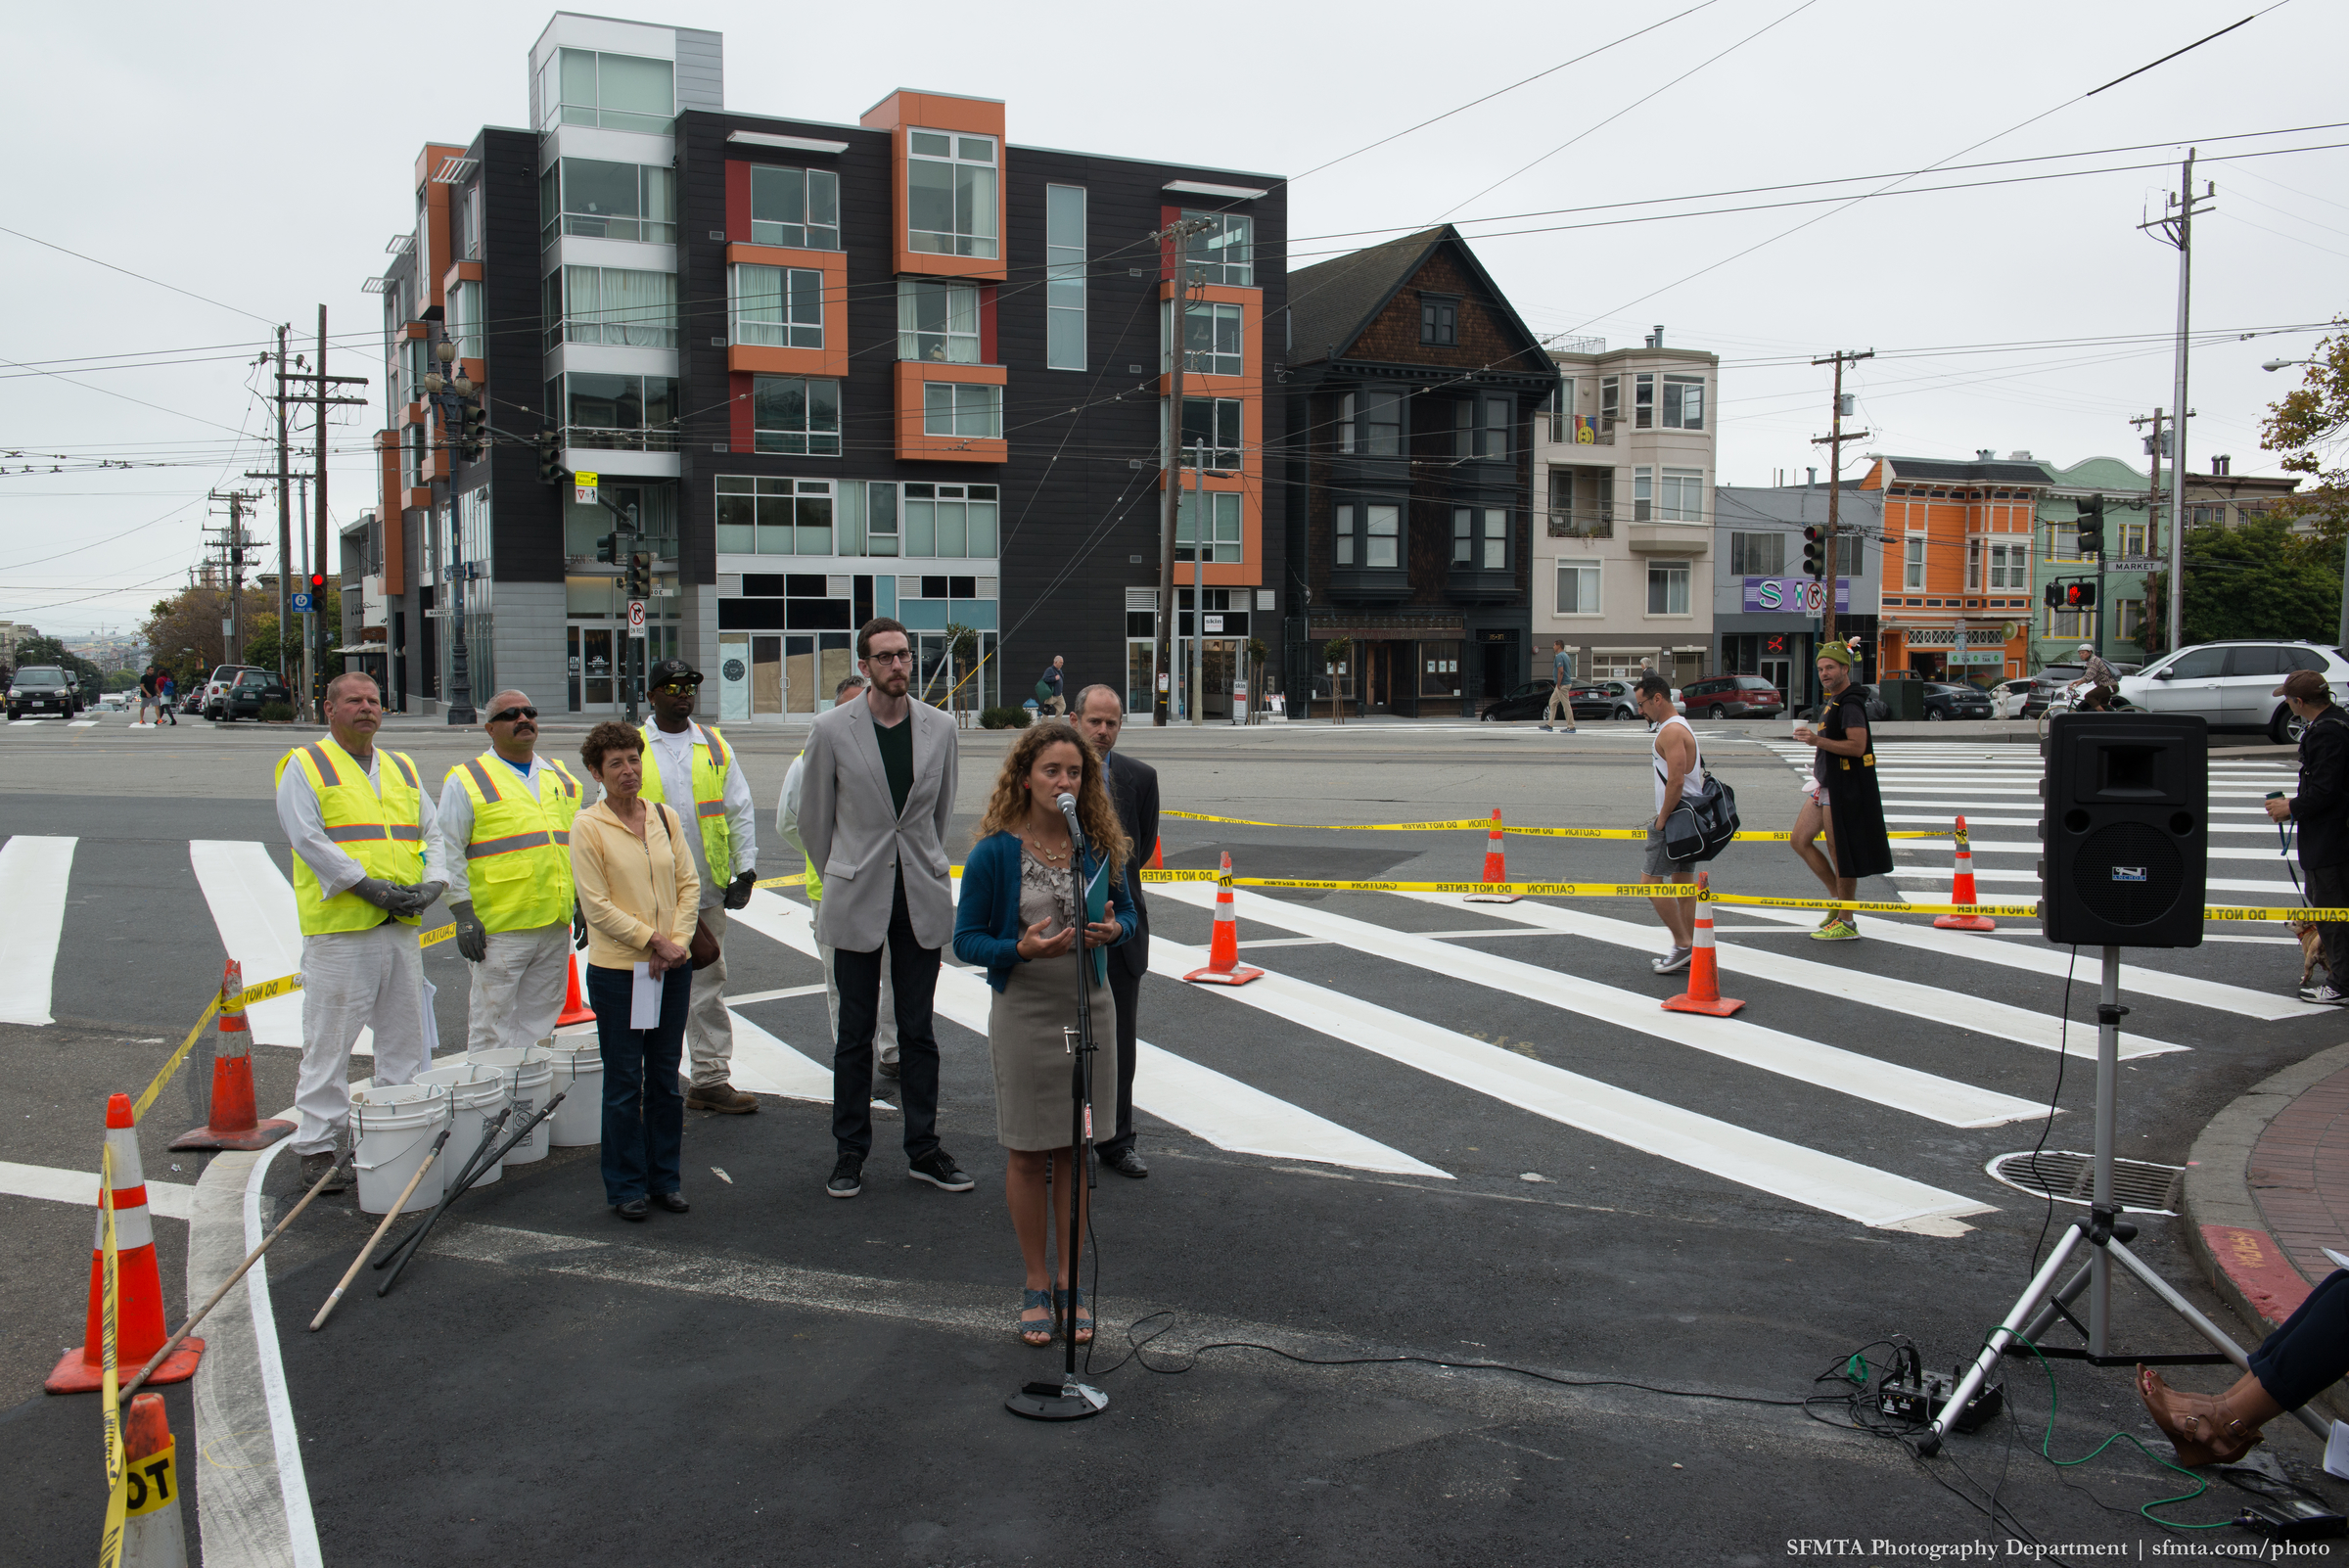 Dignitaries are gathered behind a microphone next to a crosswalk for a safety press conference, while a man in a batman t-shirt, a black knee-lenth vest, a green kid's knit hat, tennis shoes, and no pants walks through the crosswalk.